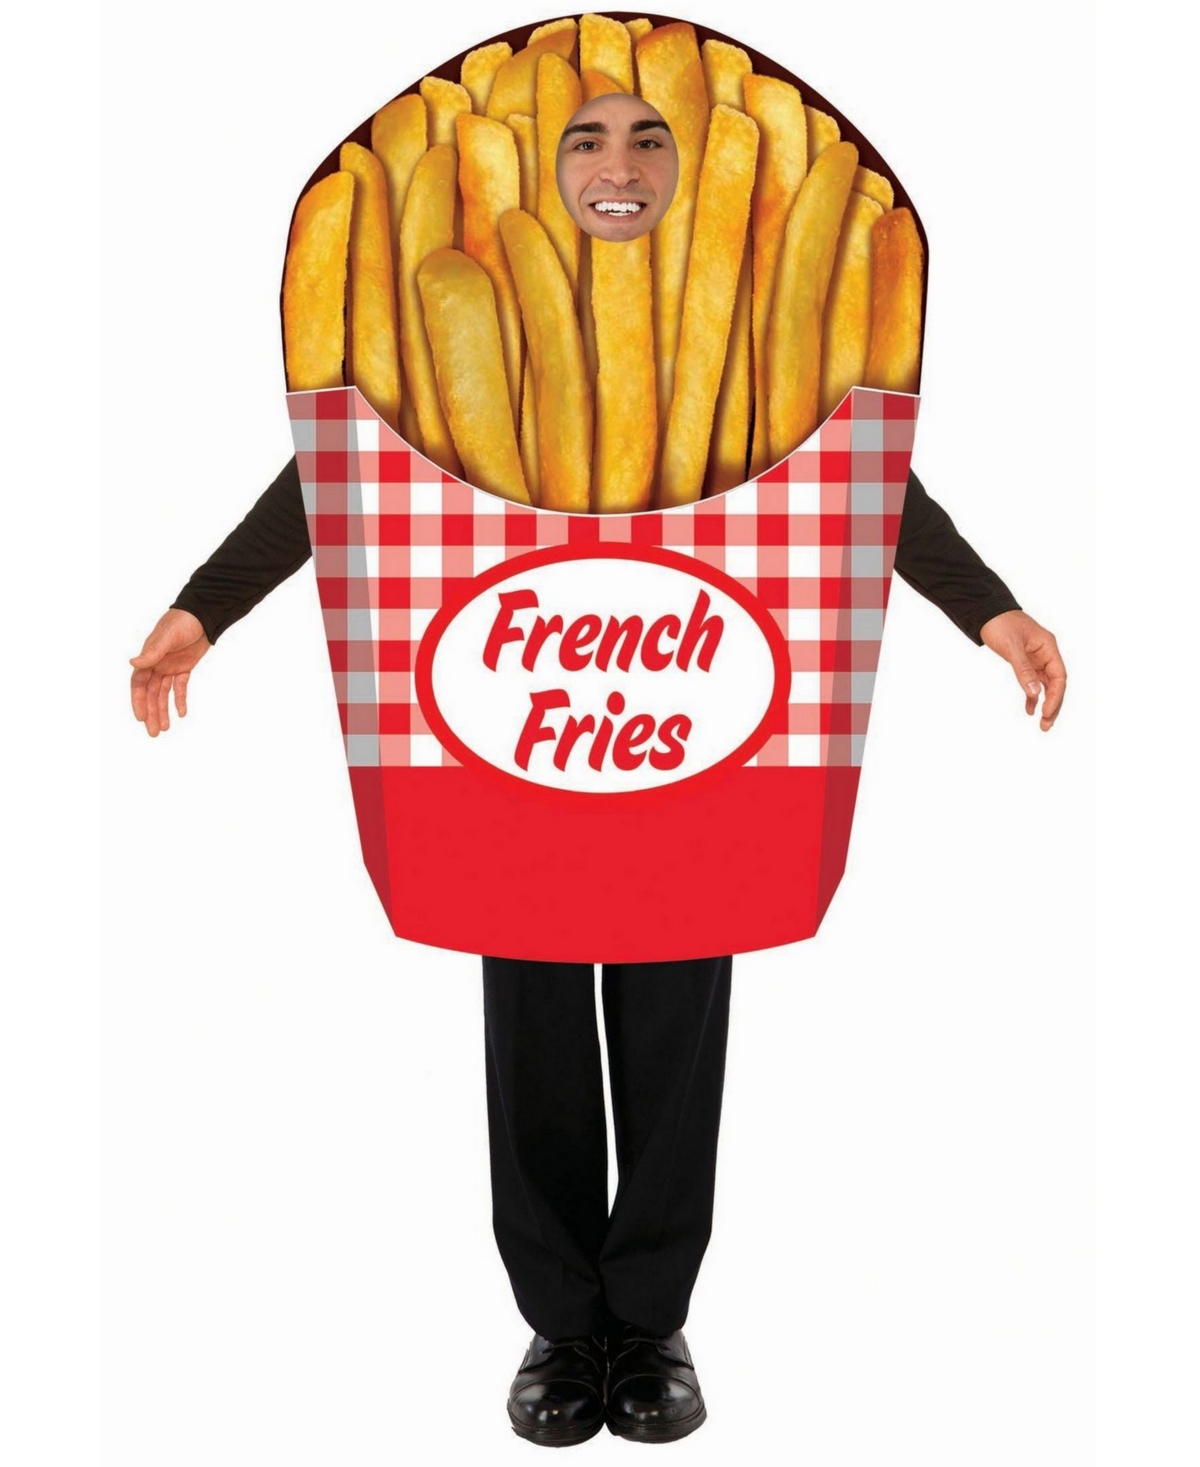 French Fries Adult Costume - Yellow